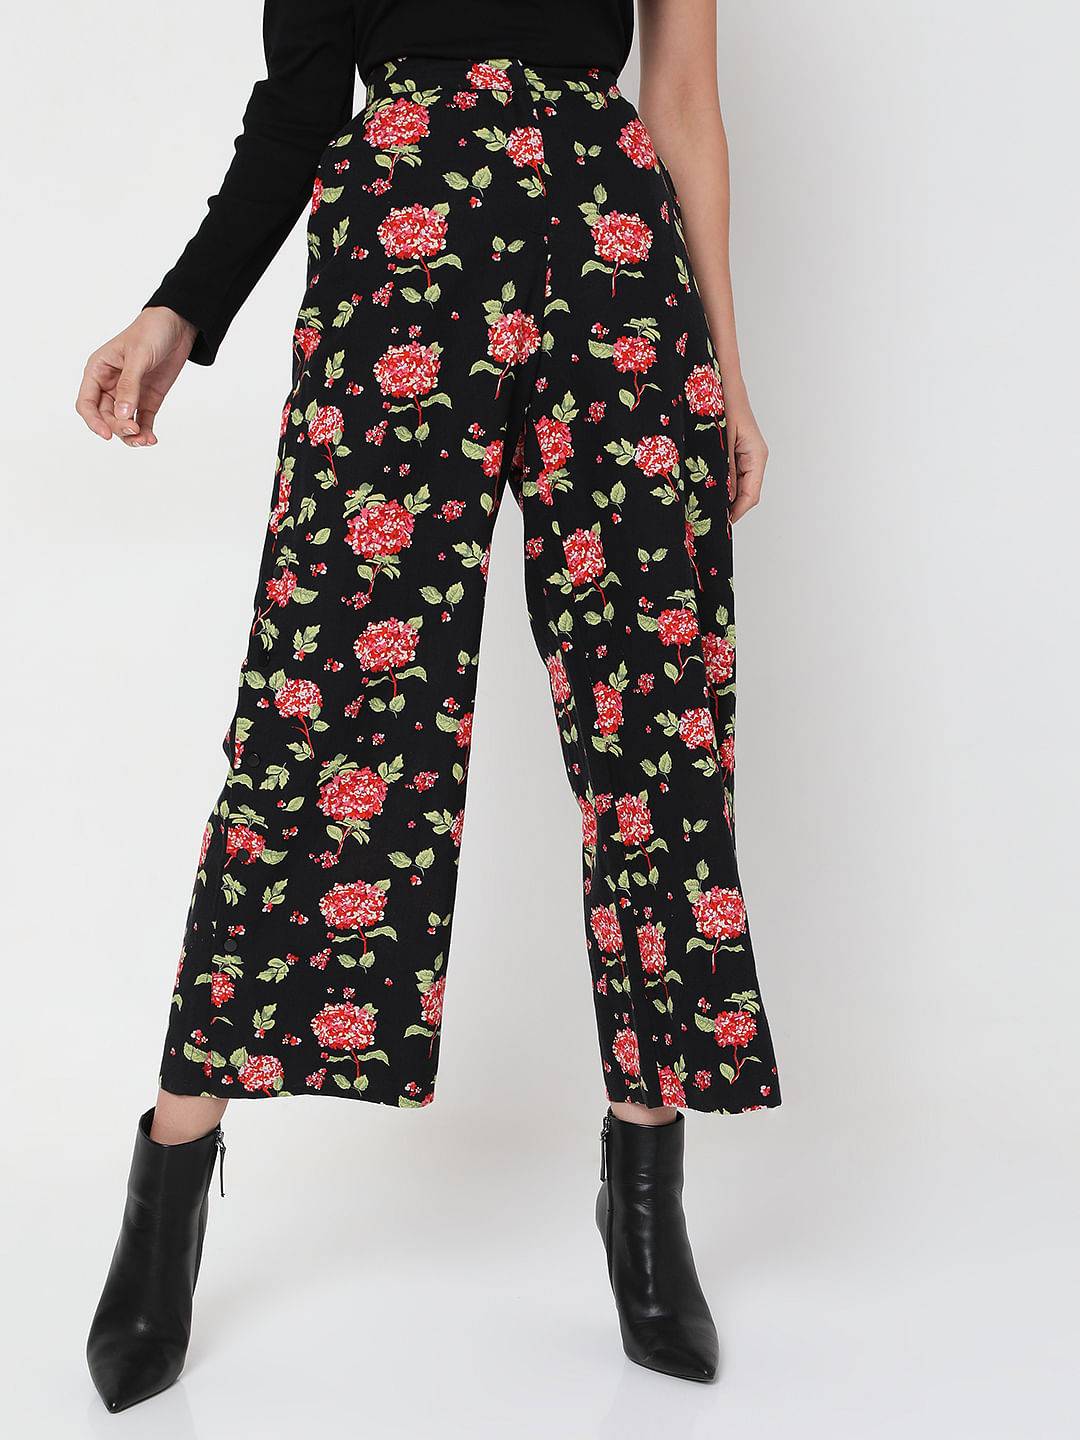 Buy Rare Women Black Floral Trousers Online at Best Prices in India   JioMart